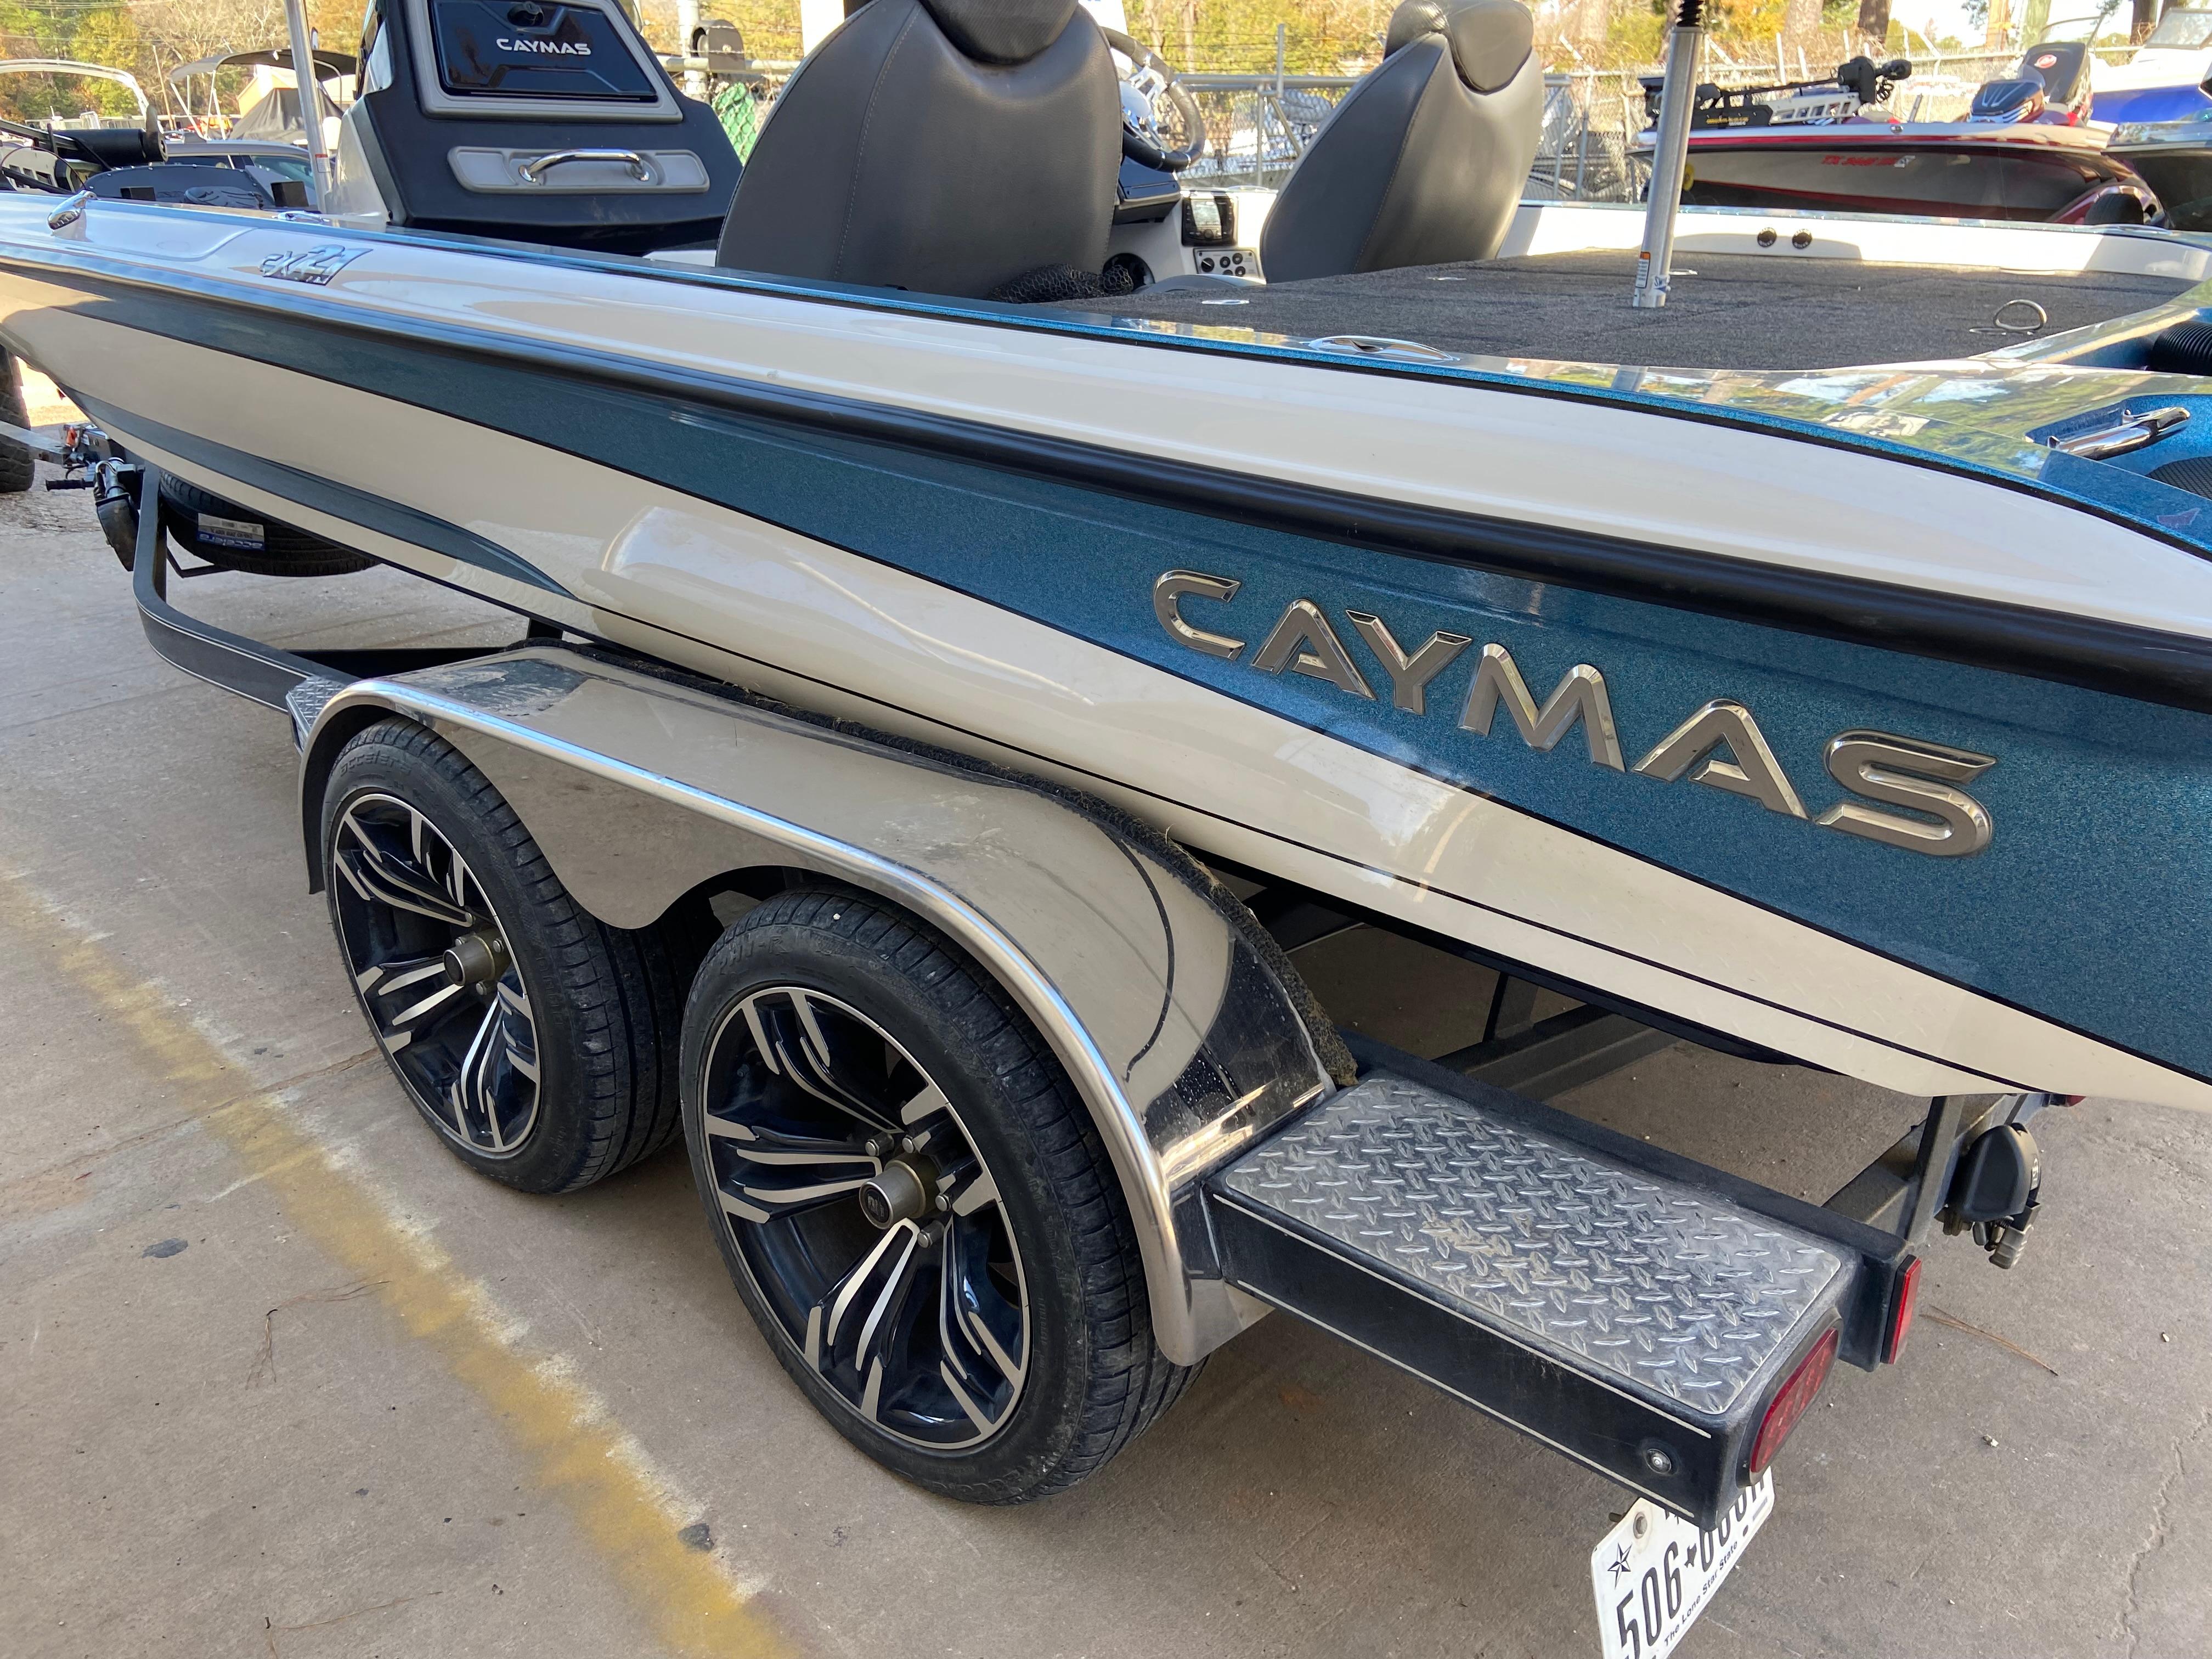 2021 Caymas CX 21 PRO Bass for sale - YachtWorld